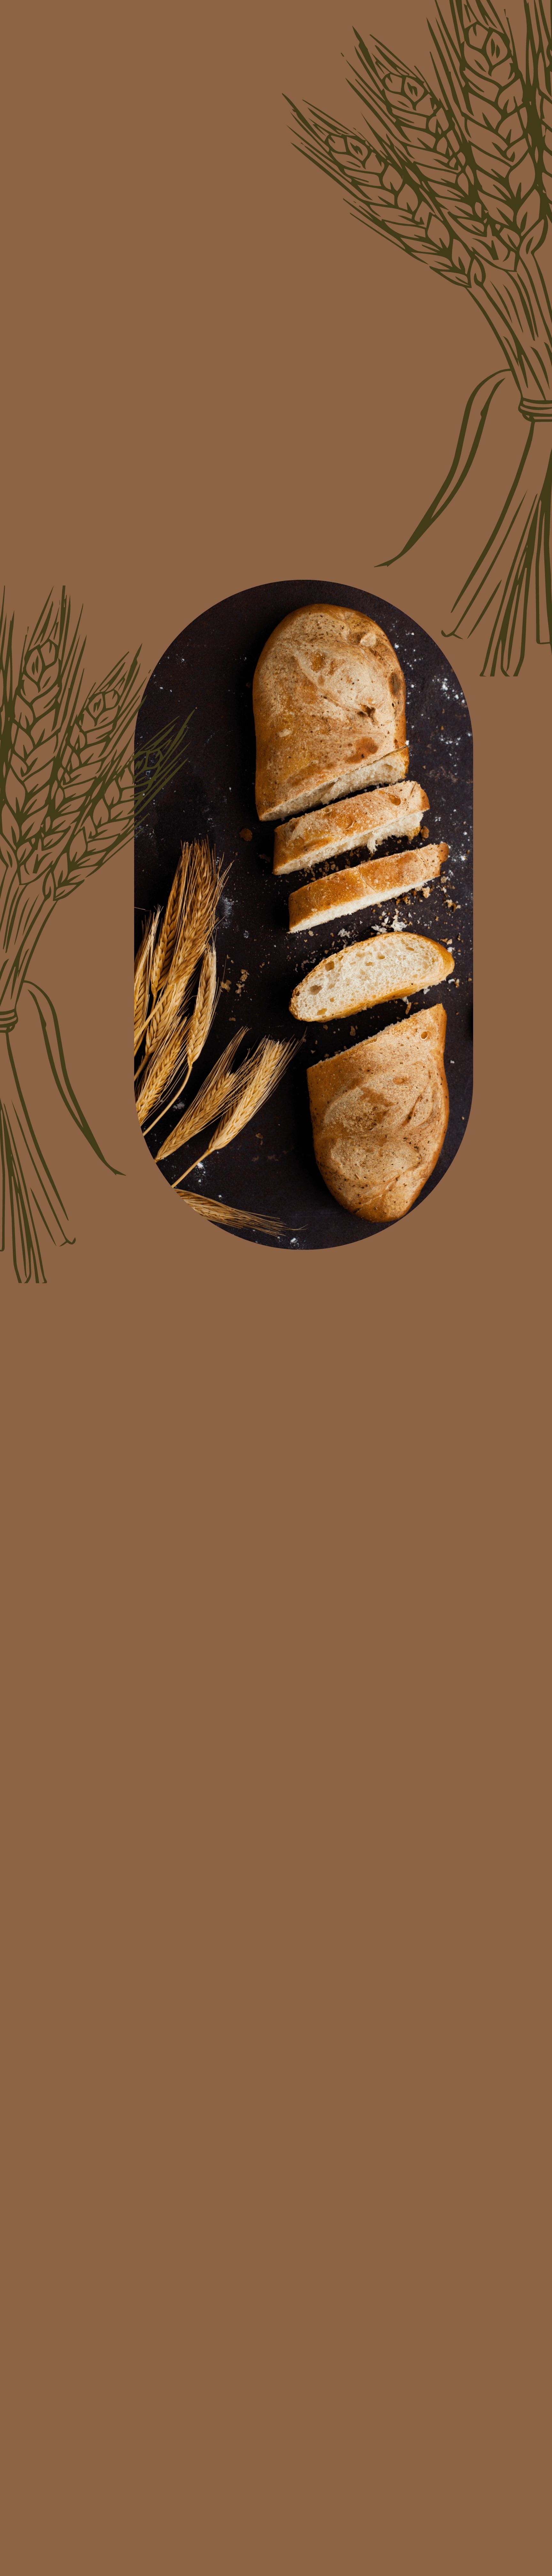 A photo of a sliced baguette on a brown background - Bakery